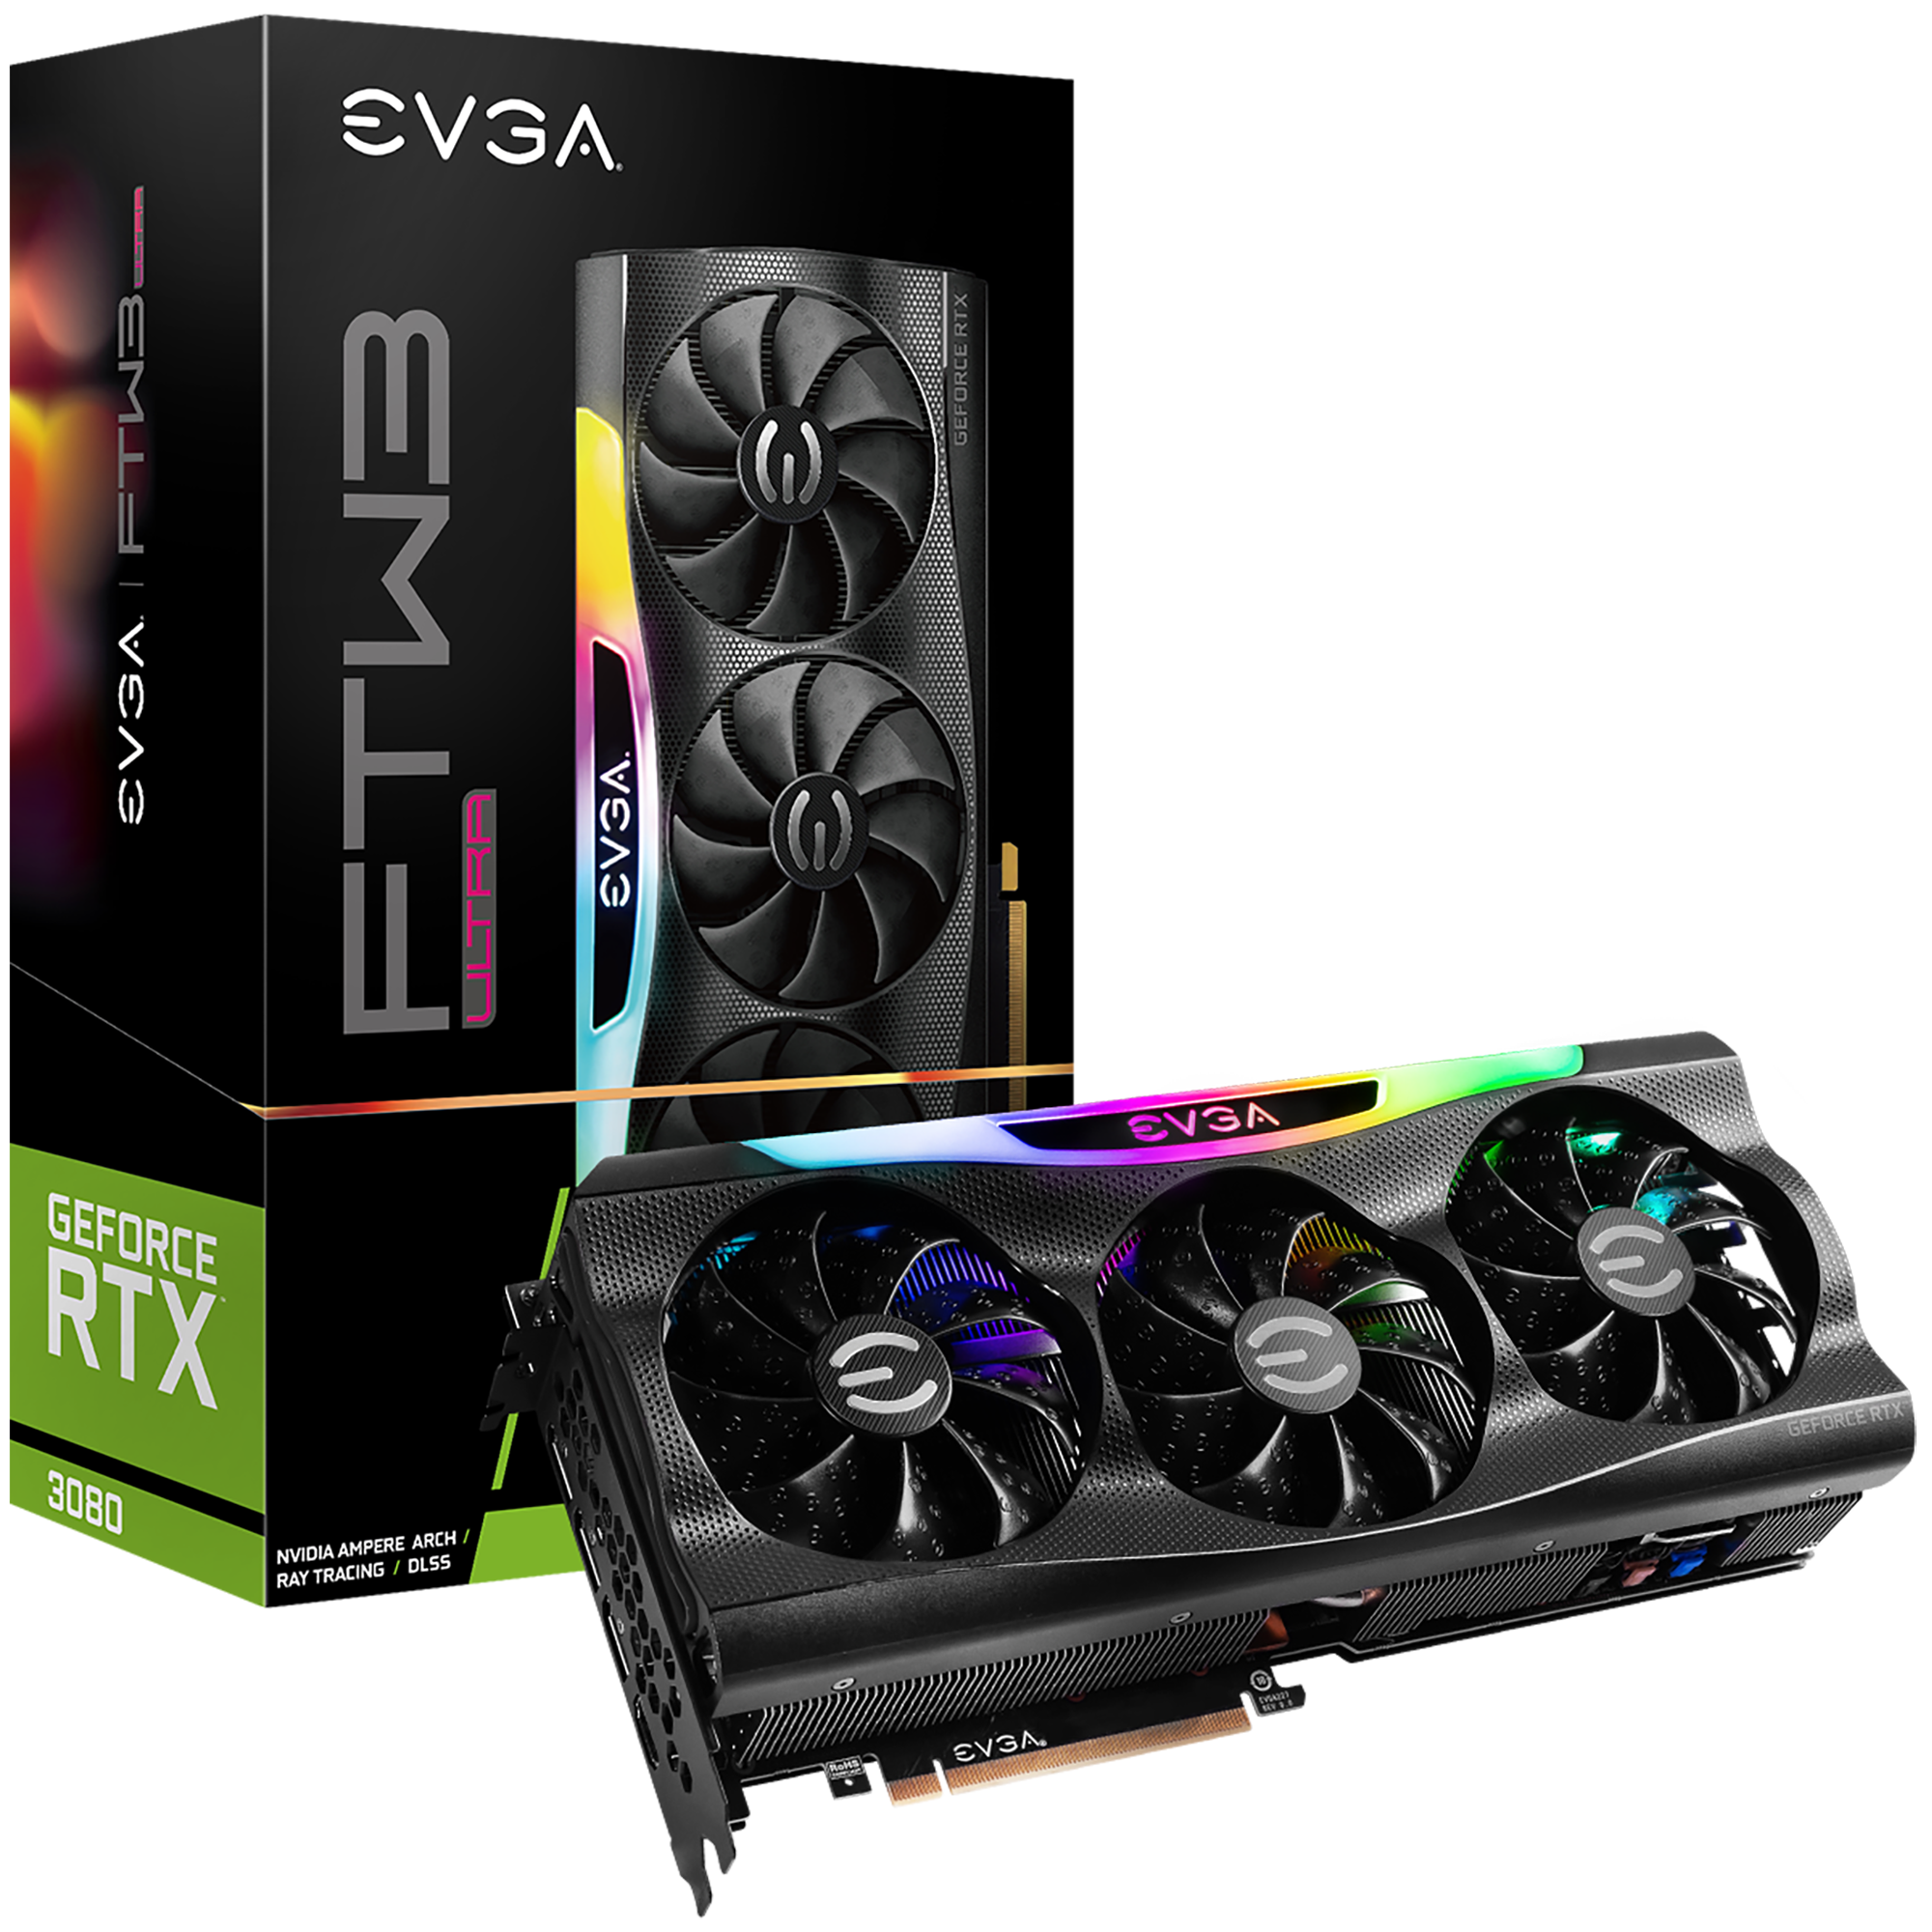 EVGA - Products - EVGA GeForce RTX 3080 FTW3 ULTRA GAMING, 10G-P5 